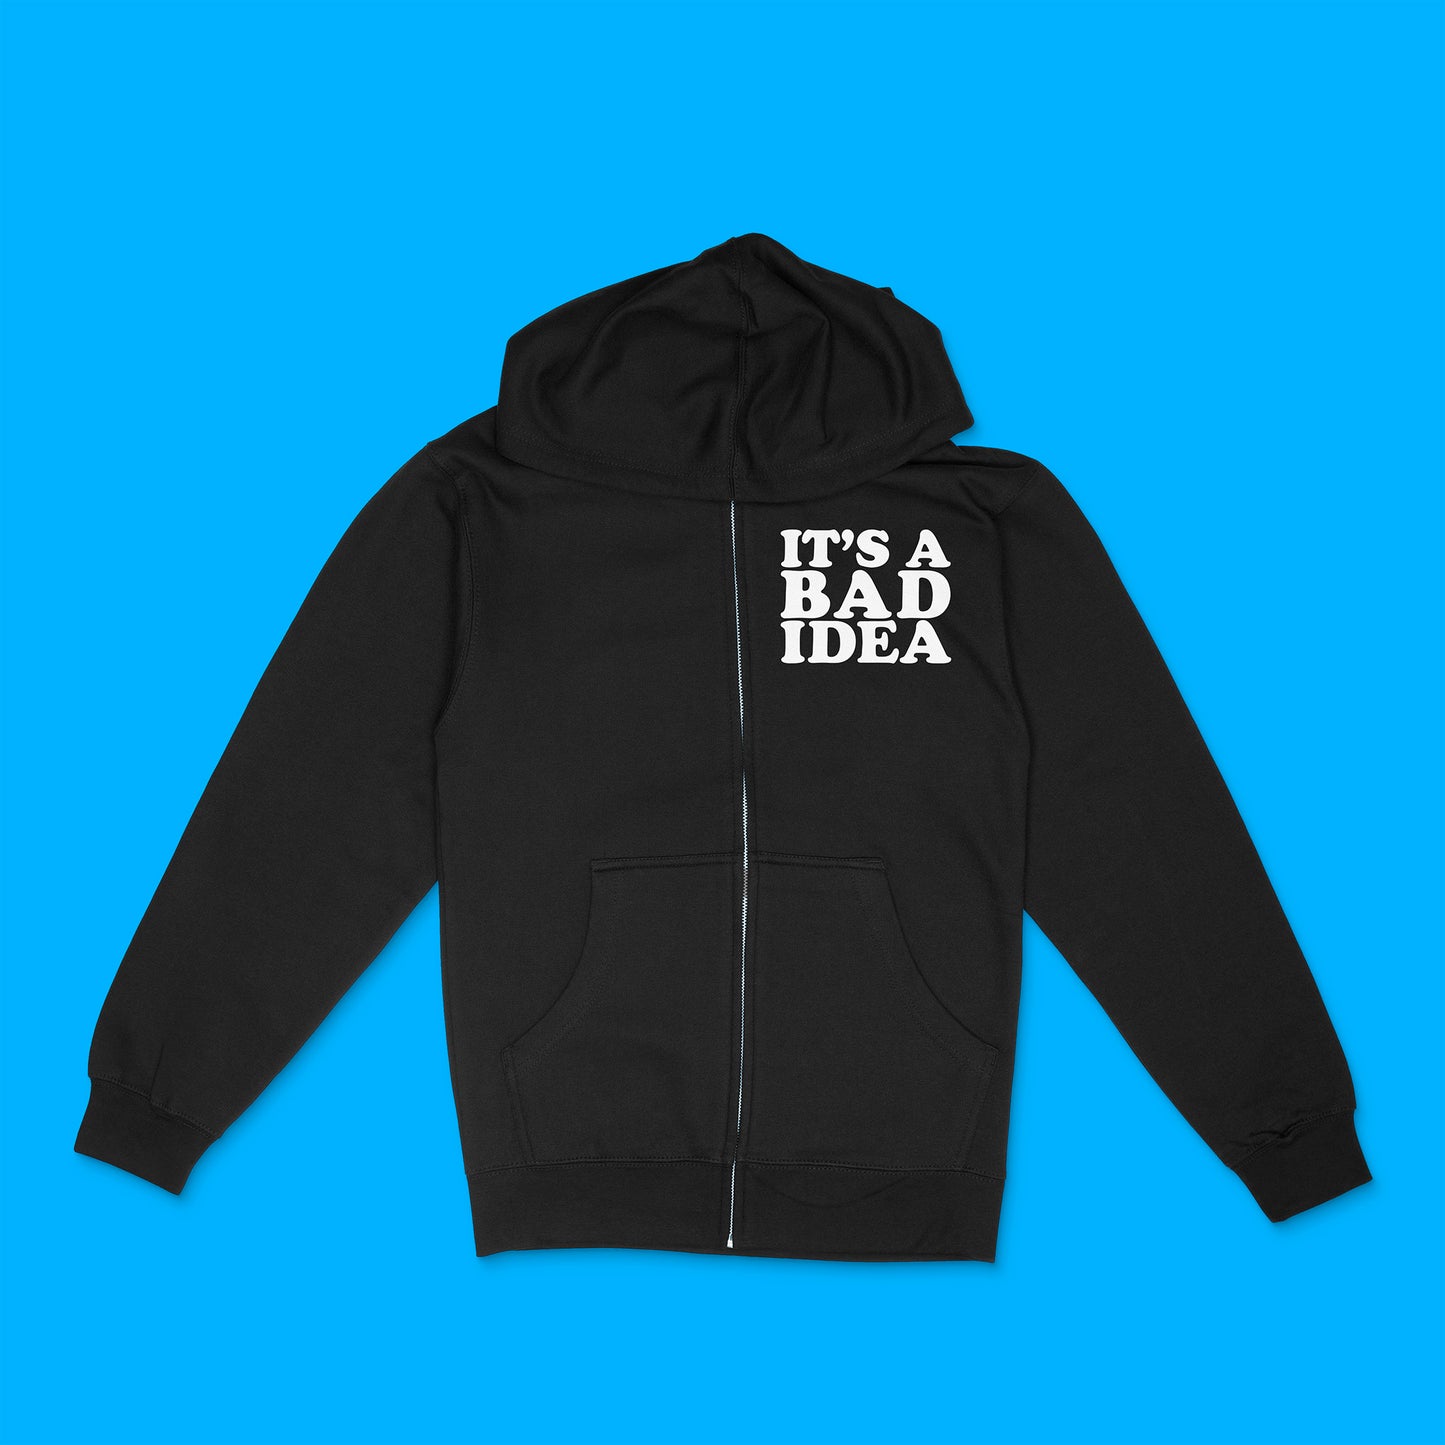 black unisex zip hoodie with custom sample text "It's a bad idea" in white matter, pop serif text style left chest of garment